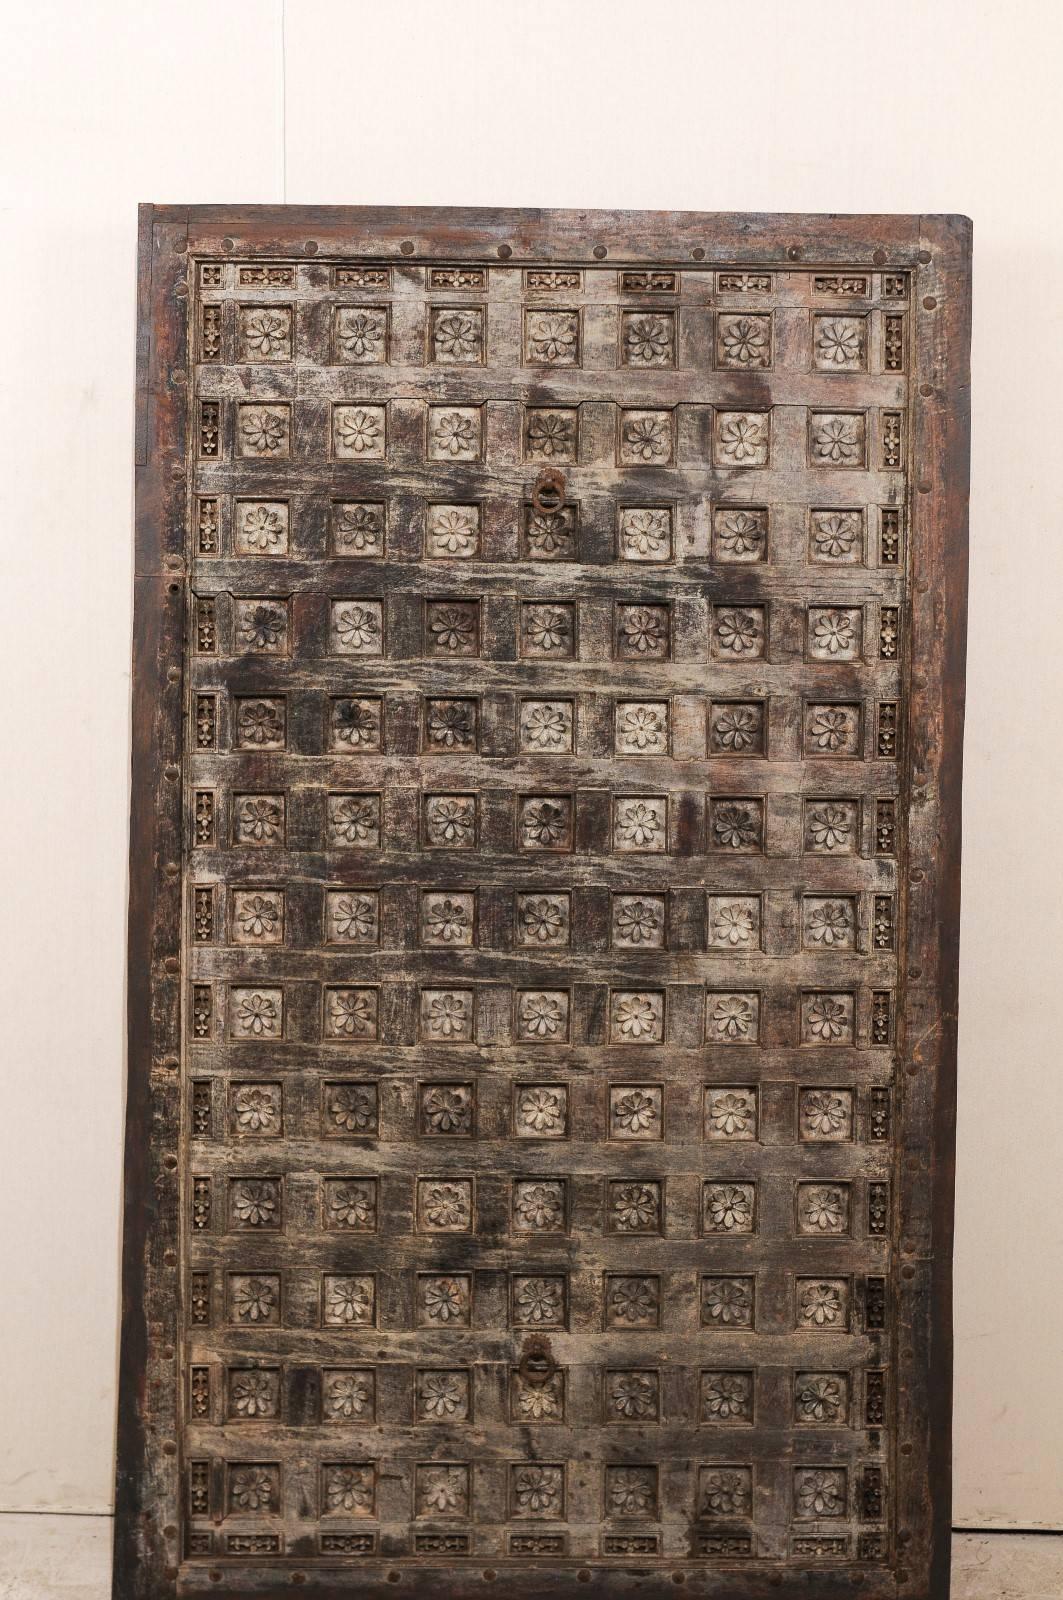 A 19th century wood carved Southern Indian decorative ceiling panel. This rectangular shaped wooden ceiling panel from the Tamil Nadu area features a depiction of delicately carved lotus flowers with the numerous coffered sections. This panel is